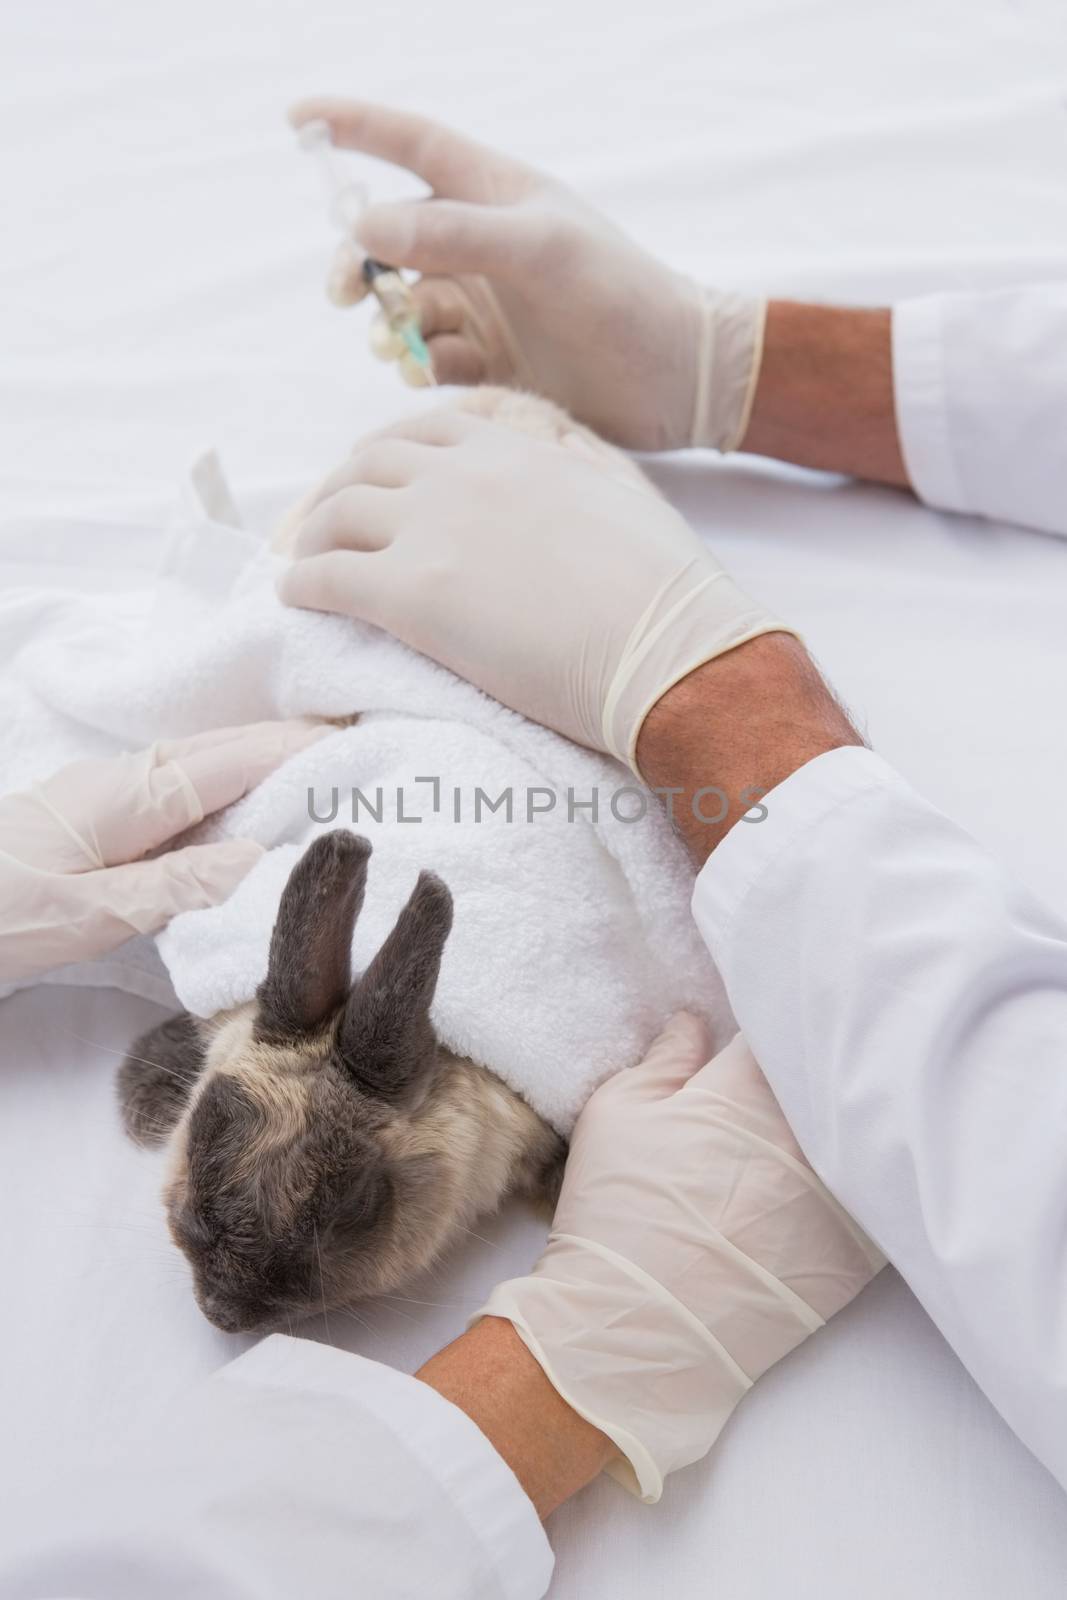 Veterinarians doing injection at a rabbit in medical office 